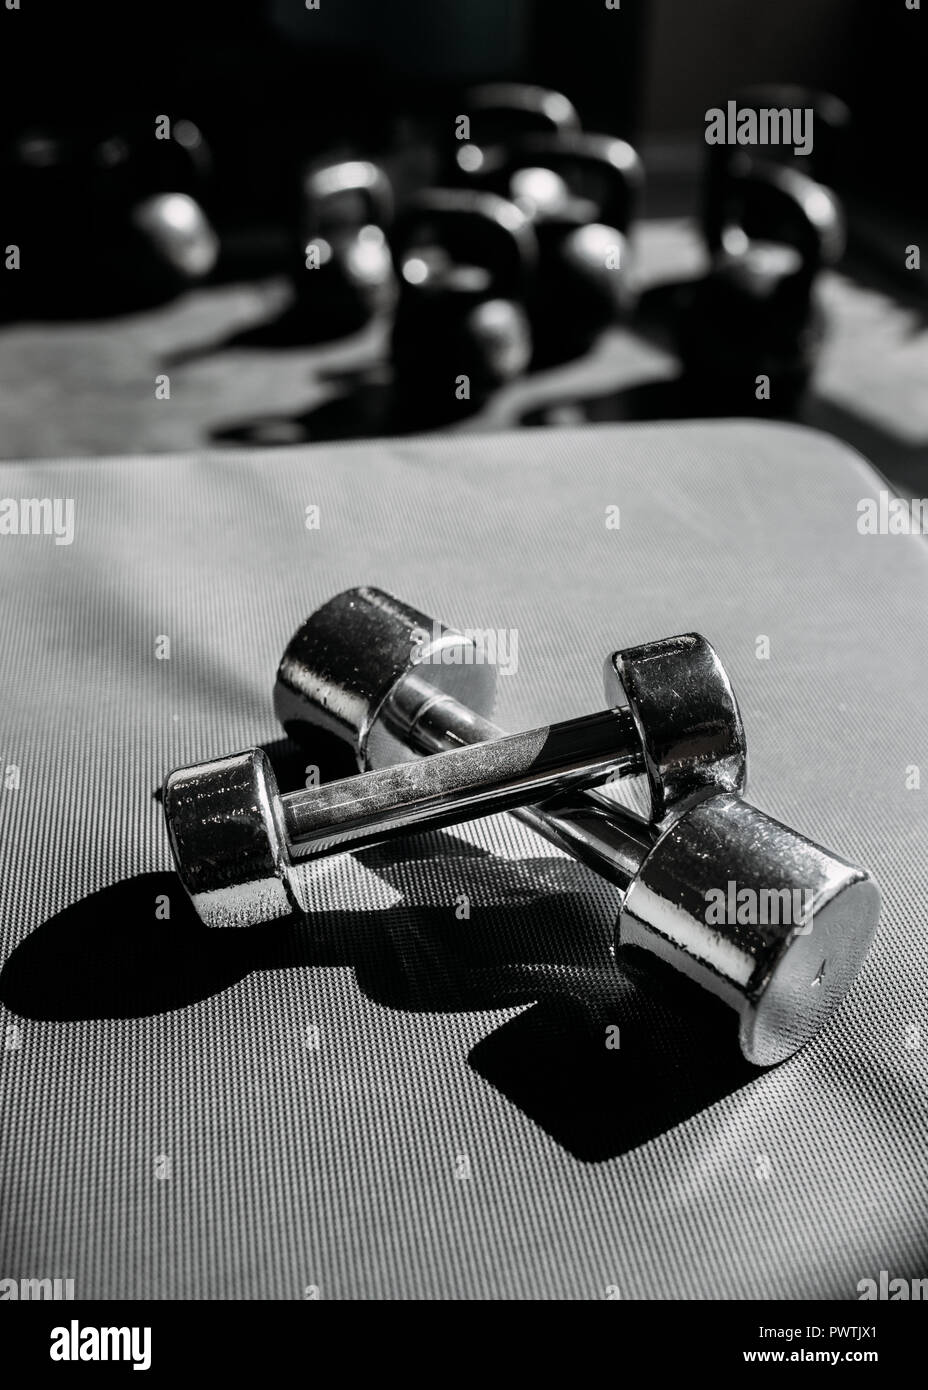 Chrome-plated dumbbells lying on a rubber floor in gym. Stock Photo